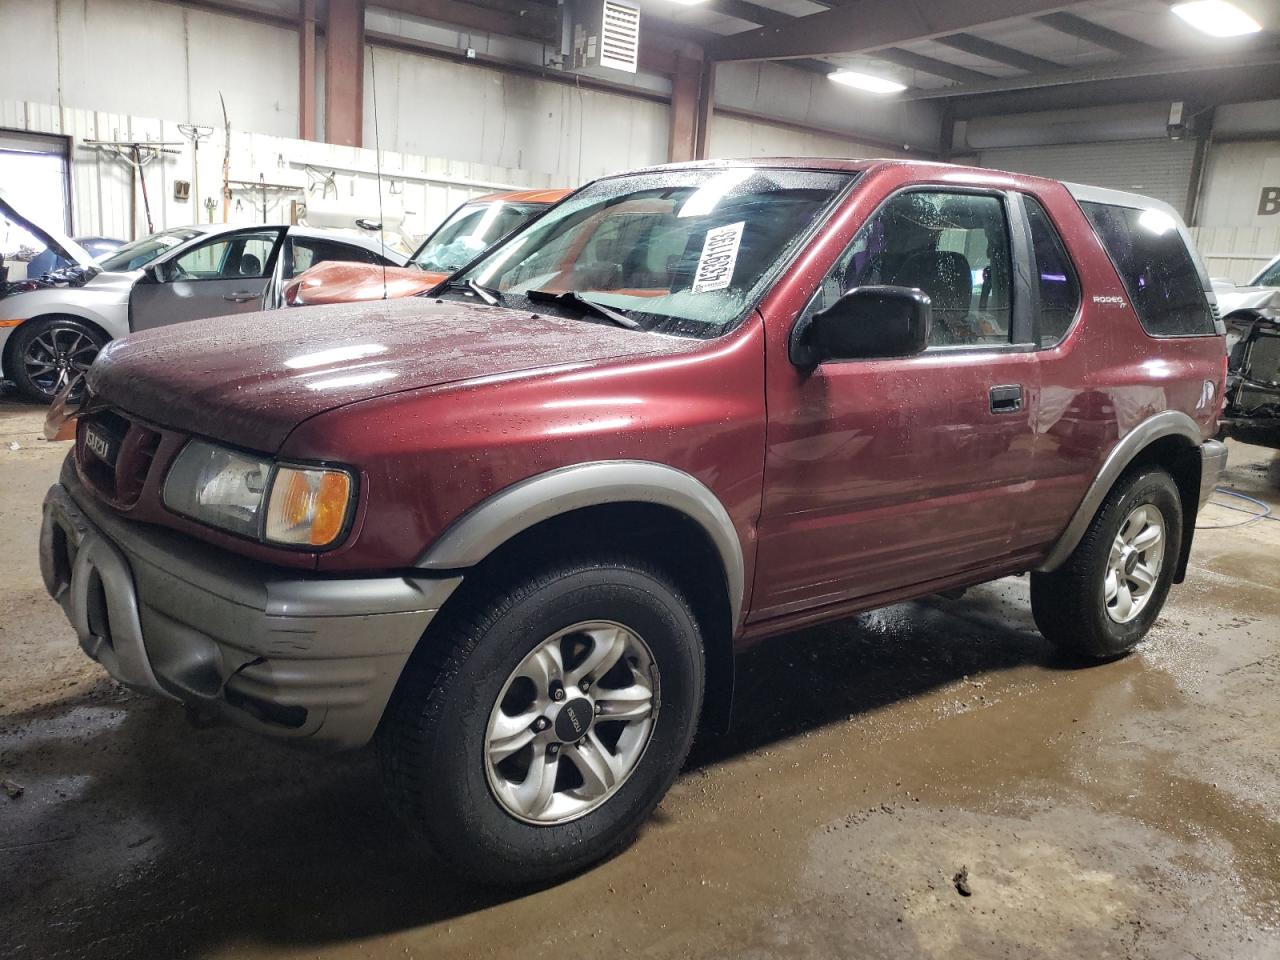 2002 Isuzu Rodeo Sport for sale at Copart Elgin, IL Lot #43391*** |  SalvageReseller.com